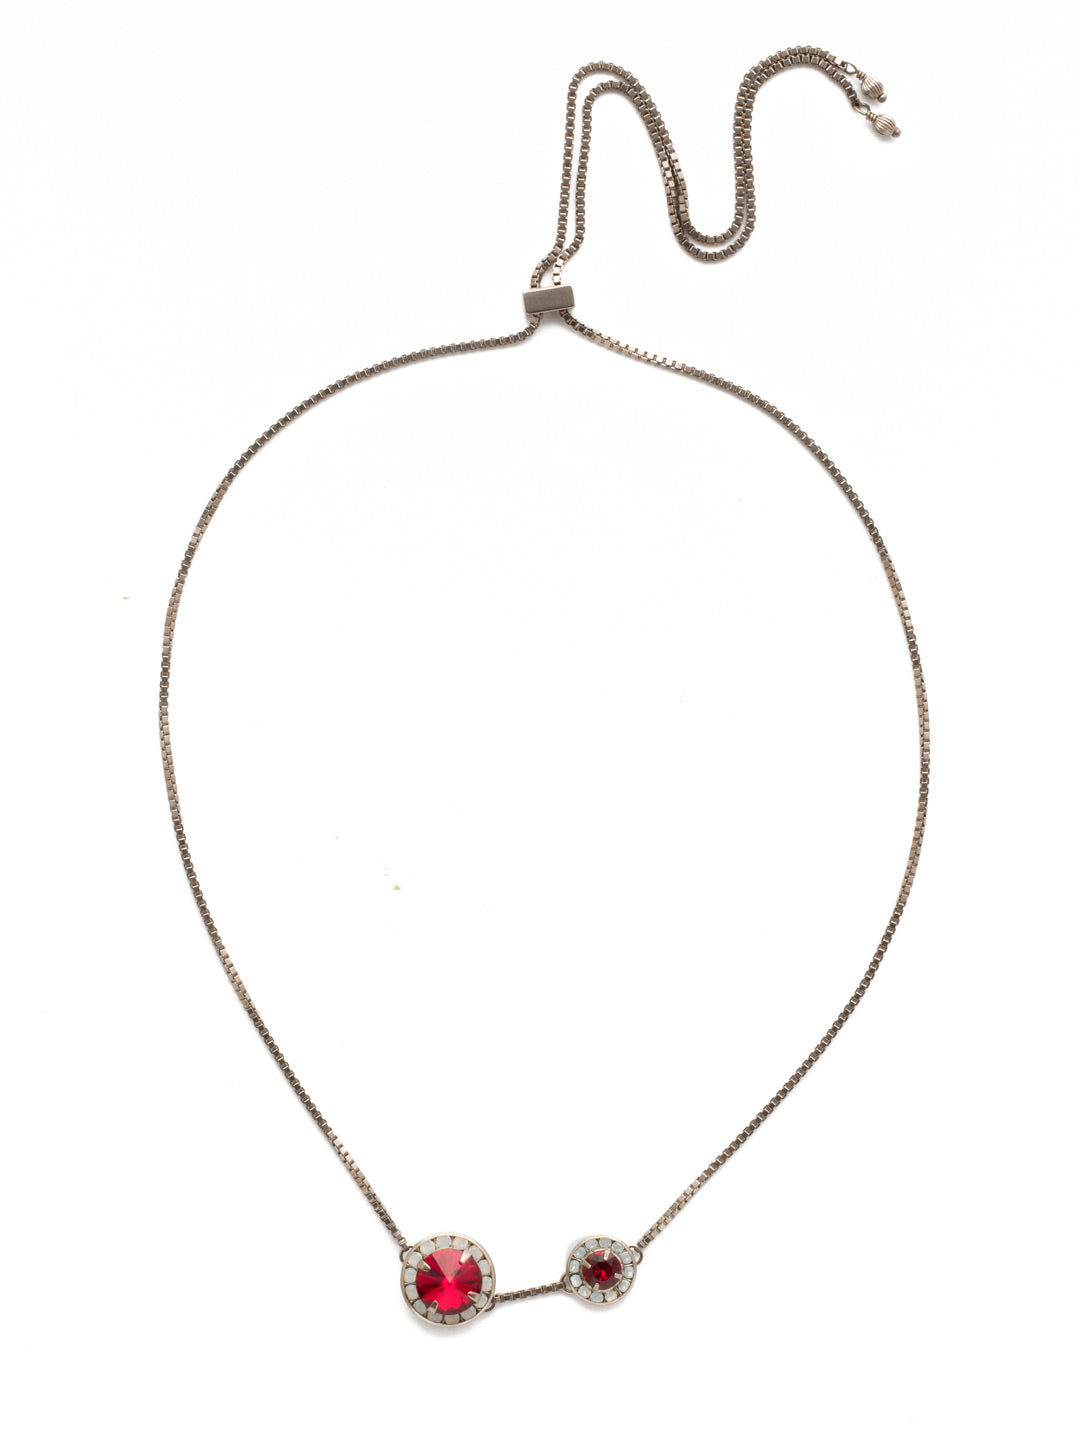 Dua Adjustable Pendant Necklace - NEB25ASCP - Two brilliant crystals bordered by smaller round crystals make up this simplistic yet glamorous choker, which can be adjusted to fit all sizes. Layer this necklace with others of varying lengths and shapes. From Sorrelli's Crimson Pride collection in our Antique Silver-tone finish.